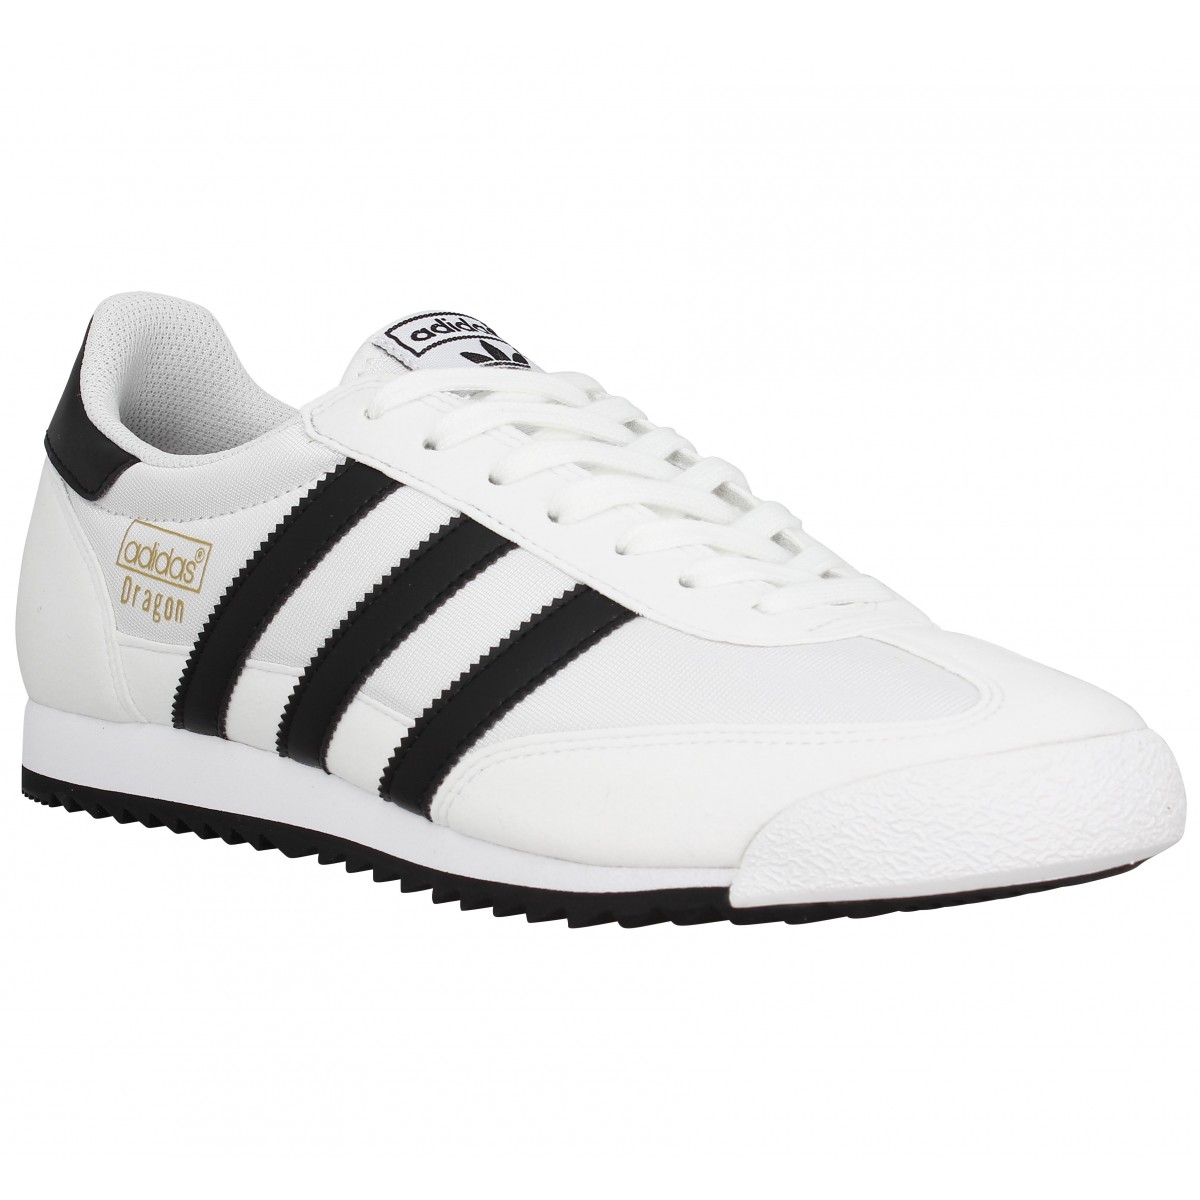 adidas dragon chaussure homme